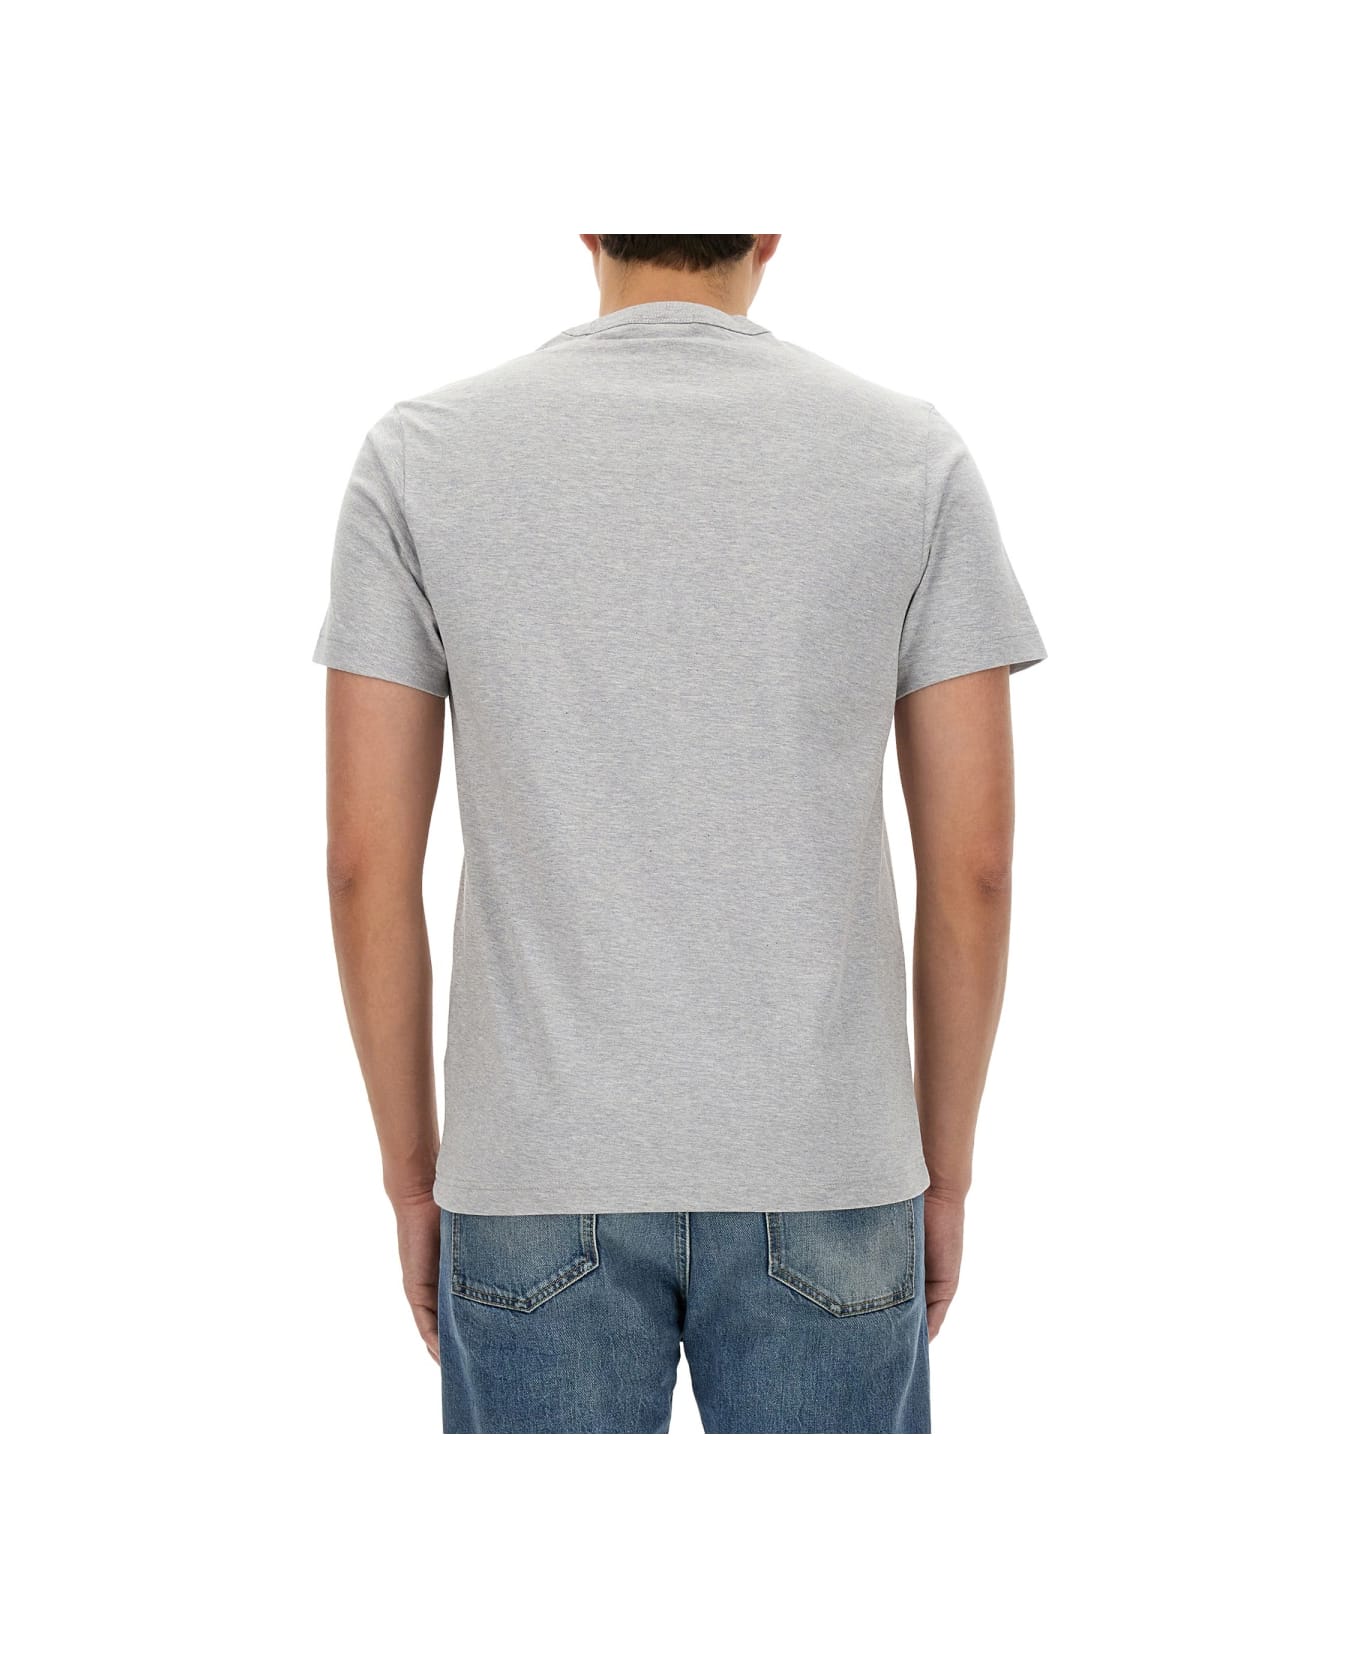 Lacoste T-shirt With Print - GREY